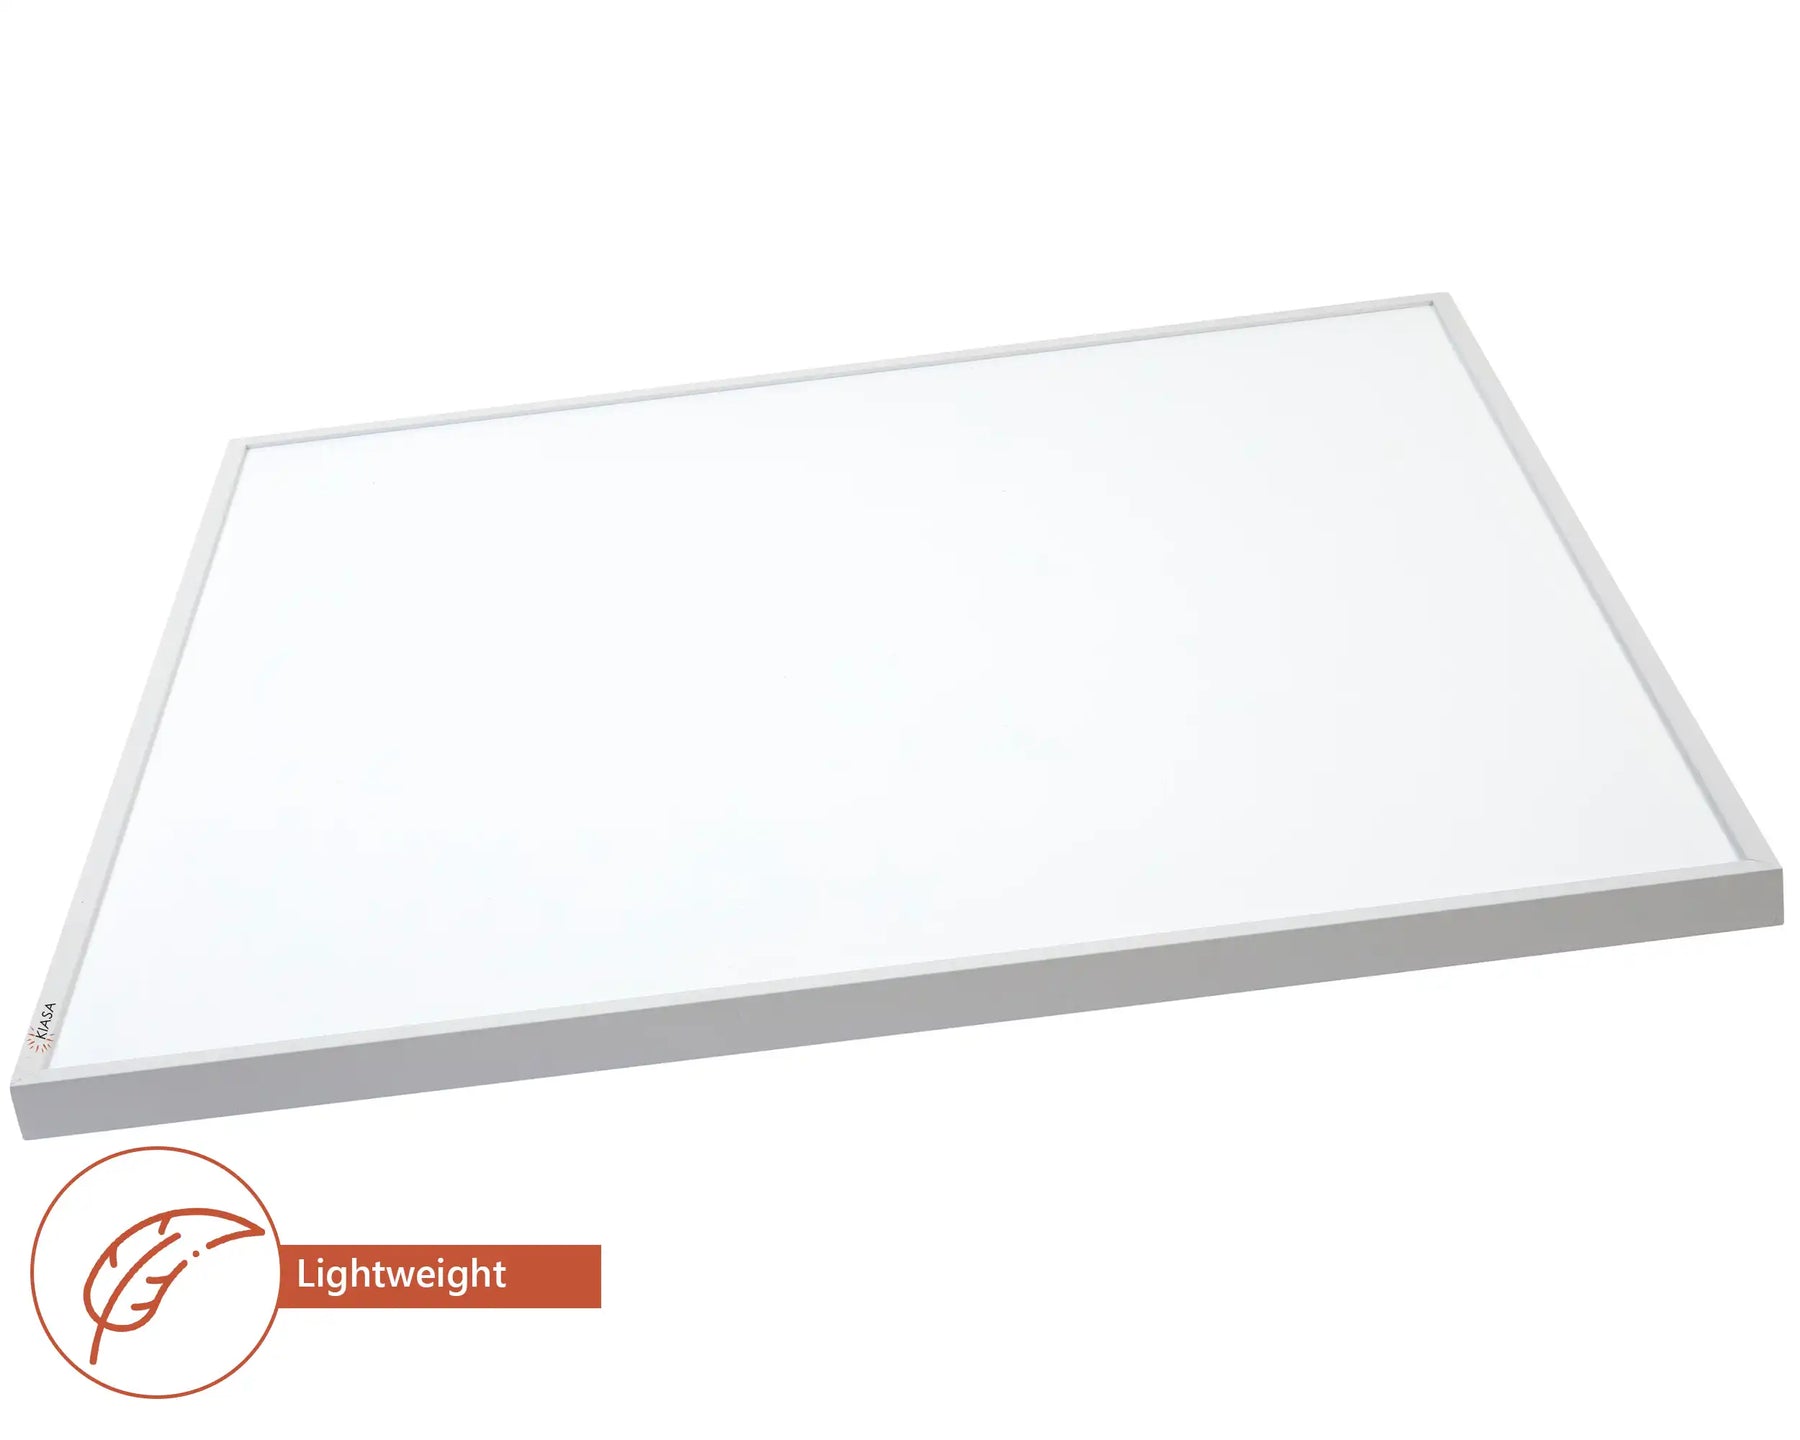 180W Infrared Heating Panel - Grade A